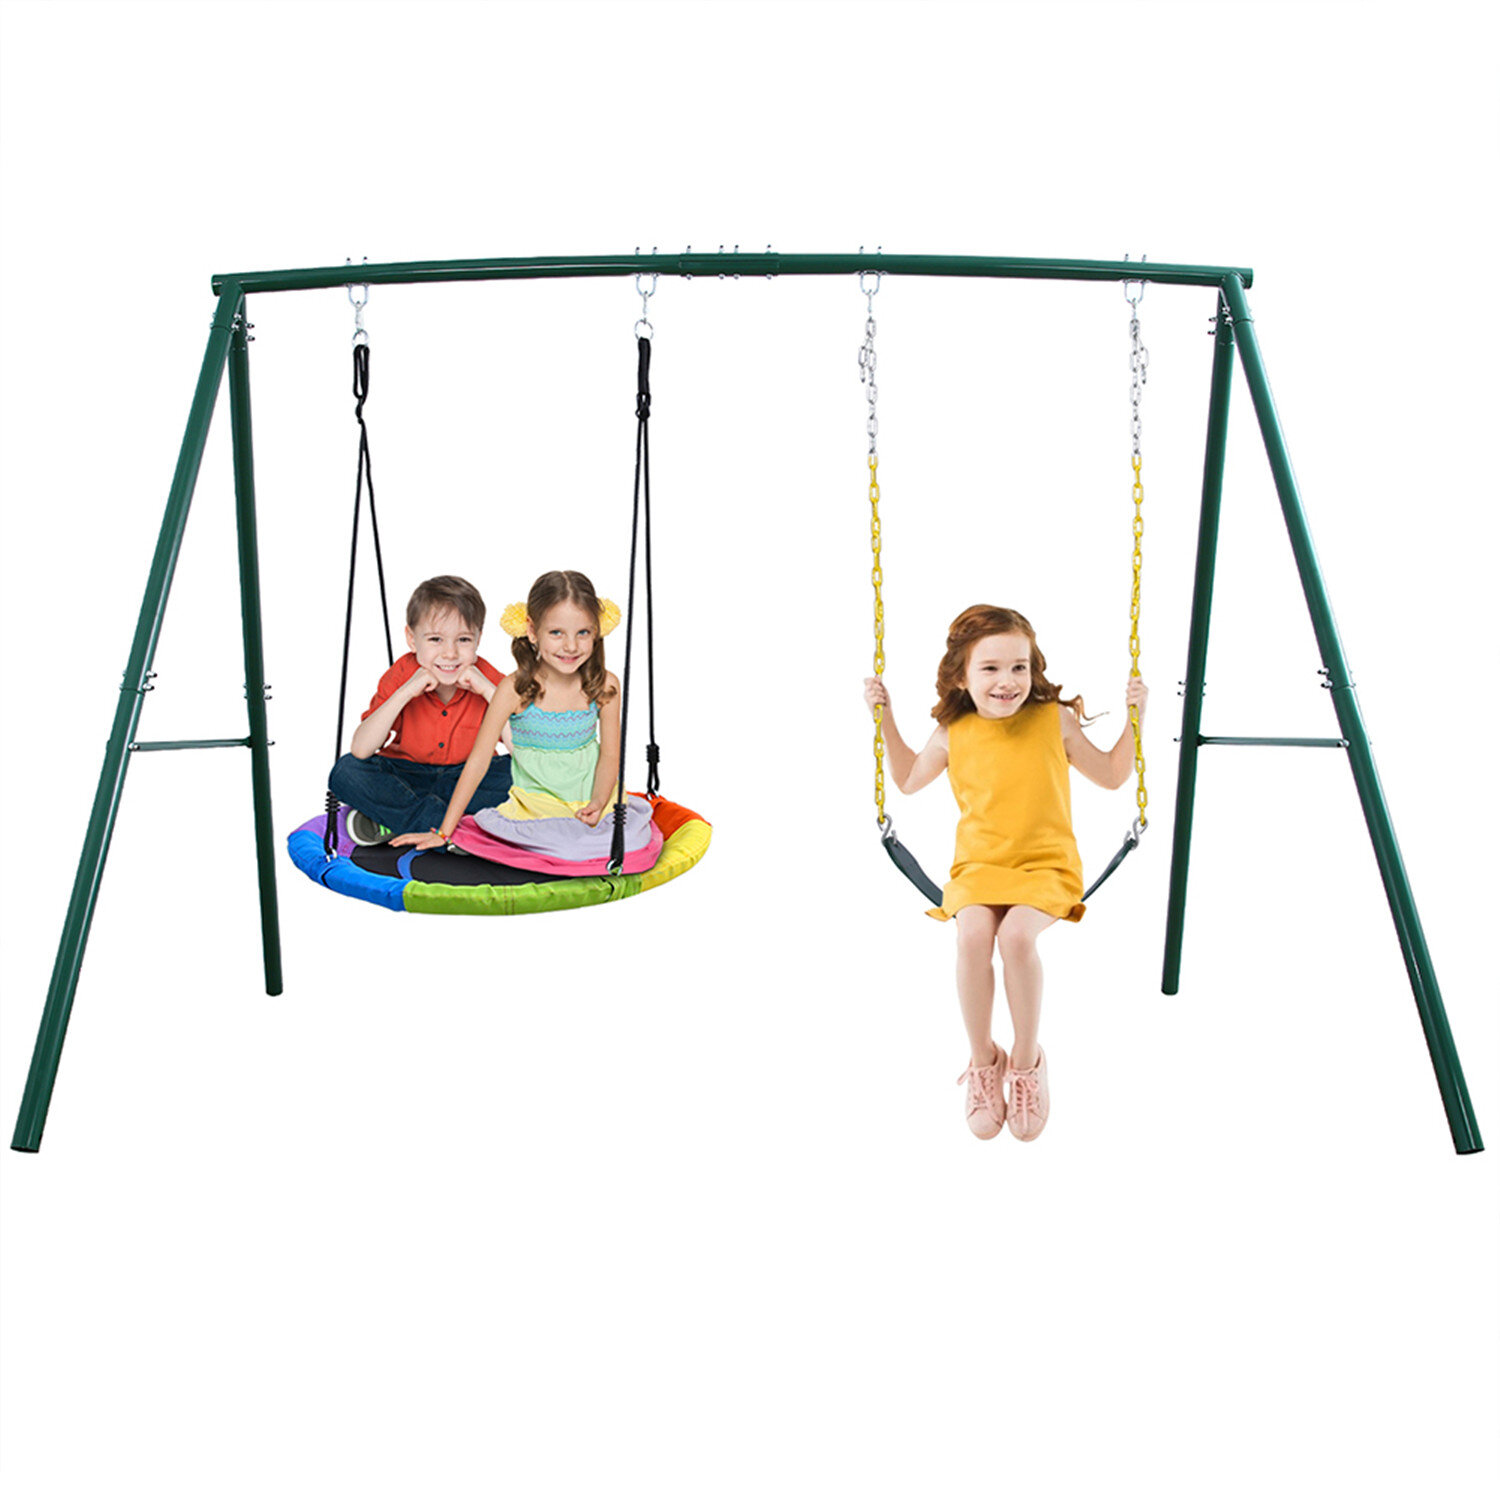 Garden Swing Seat Ex-DISPLAY with Height Adjustable Ropes Kids Climbing Frame 